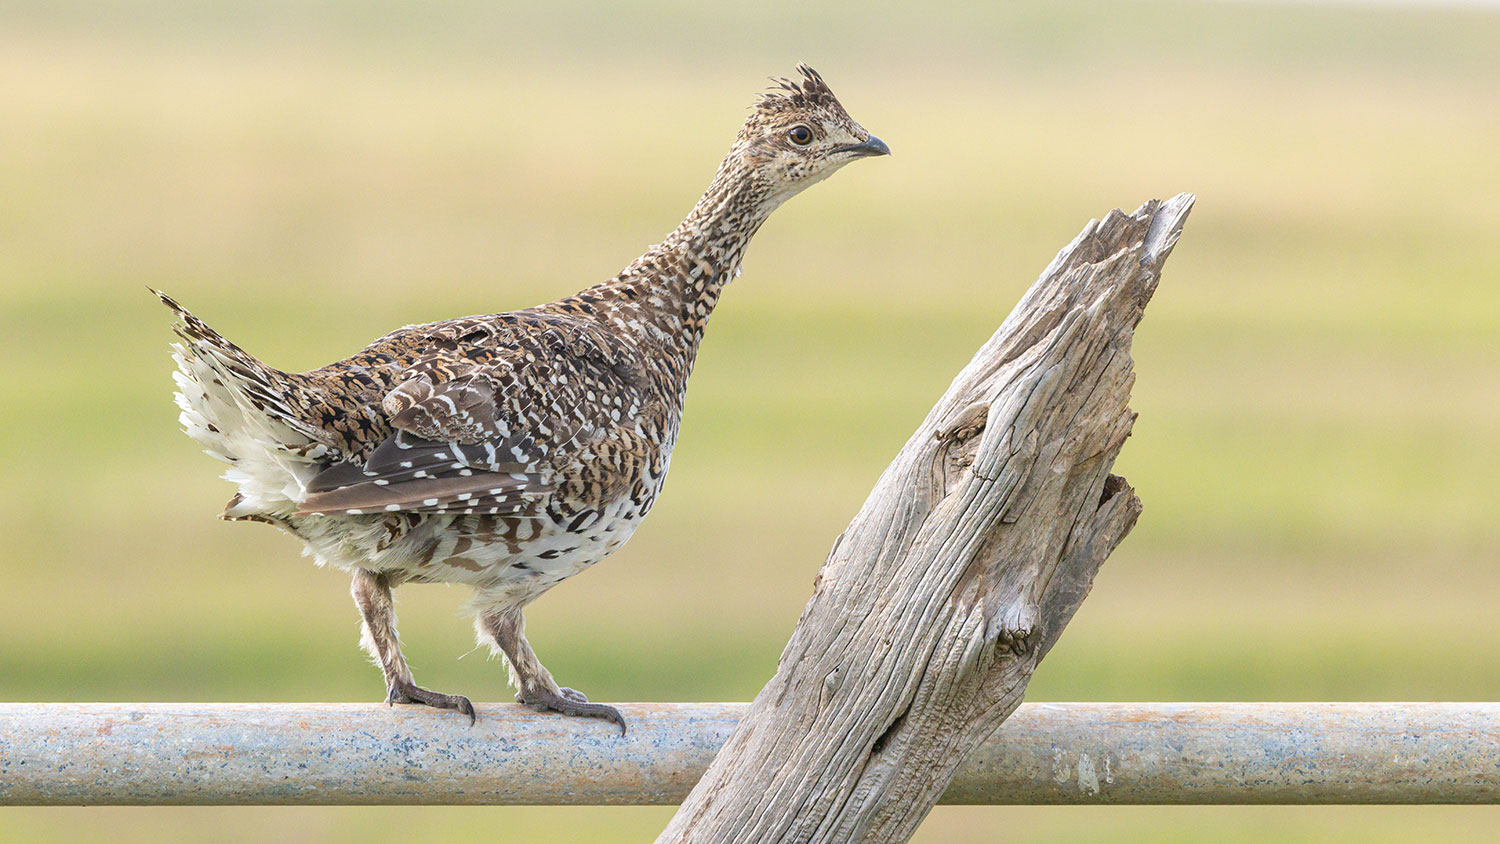 Sharp-tailed grouse on a fence